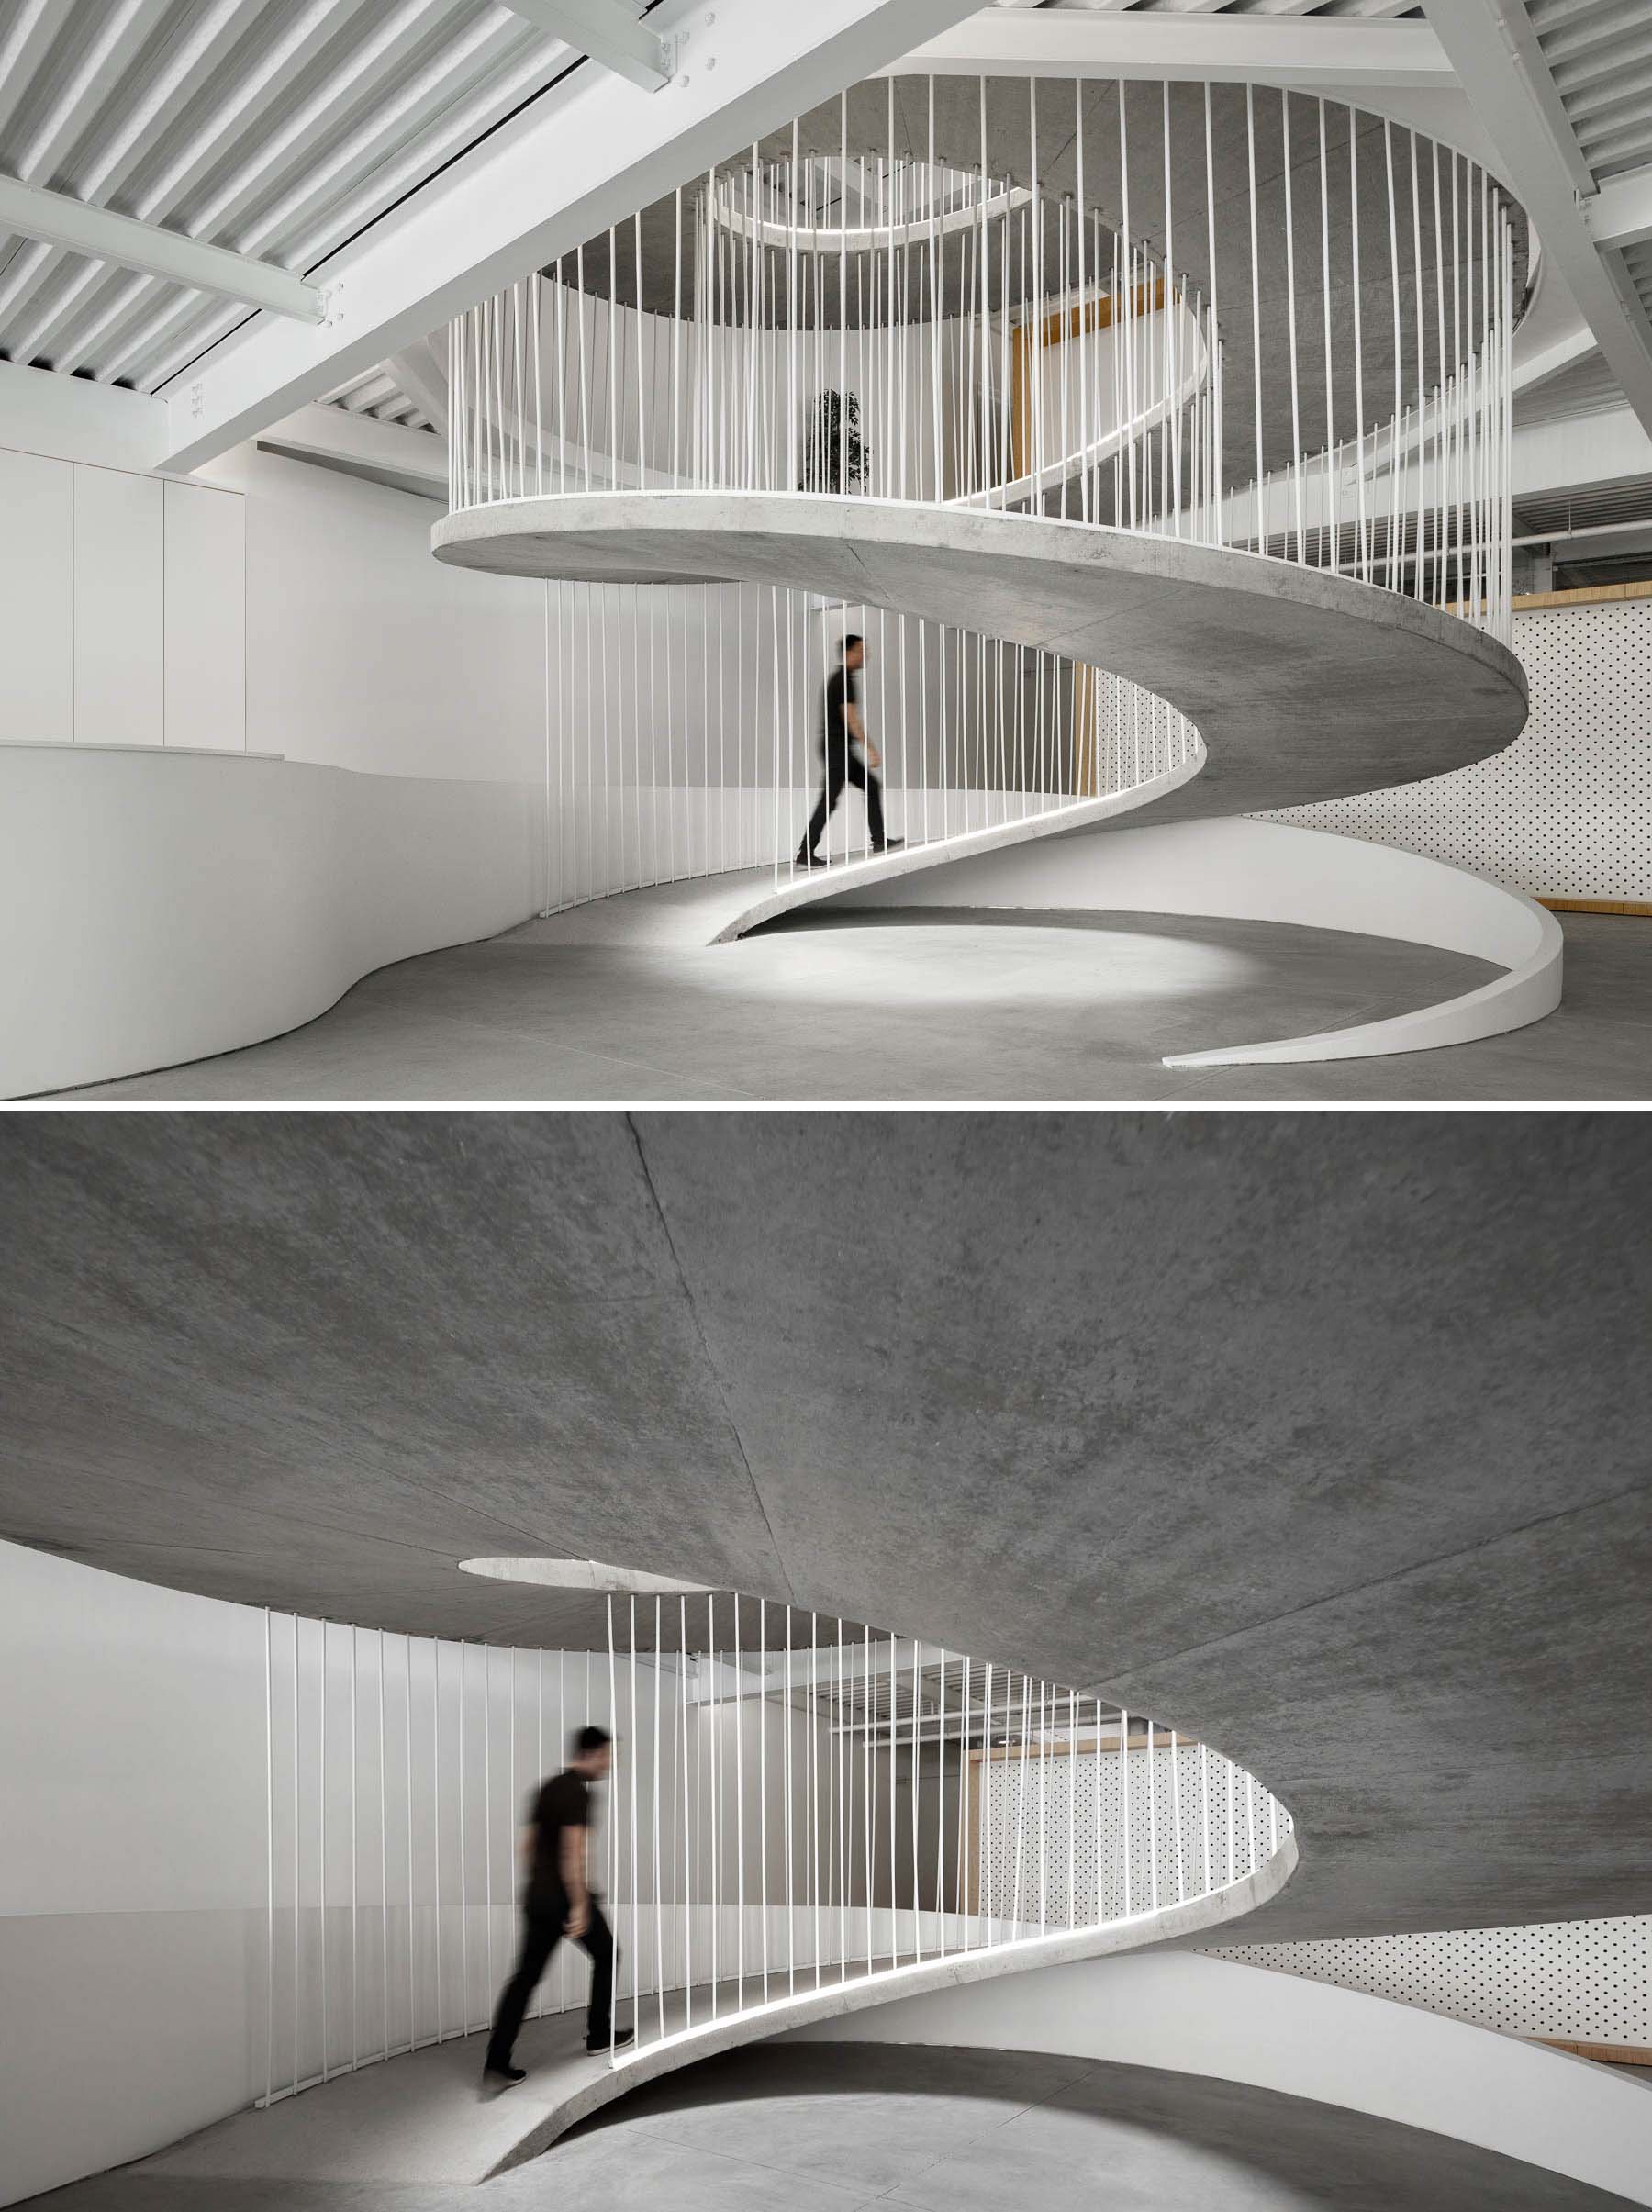 A spiraling ramp replaces the need for stairs in this modern office and adds a sculptural element.